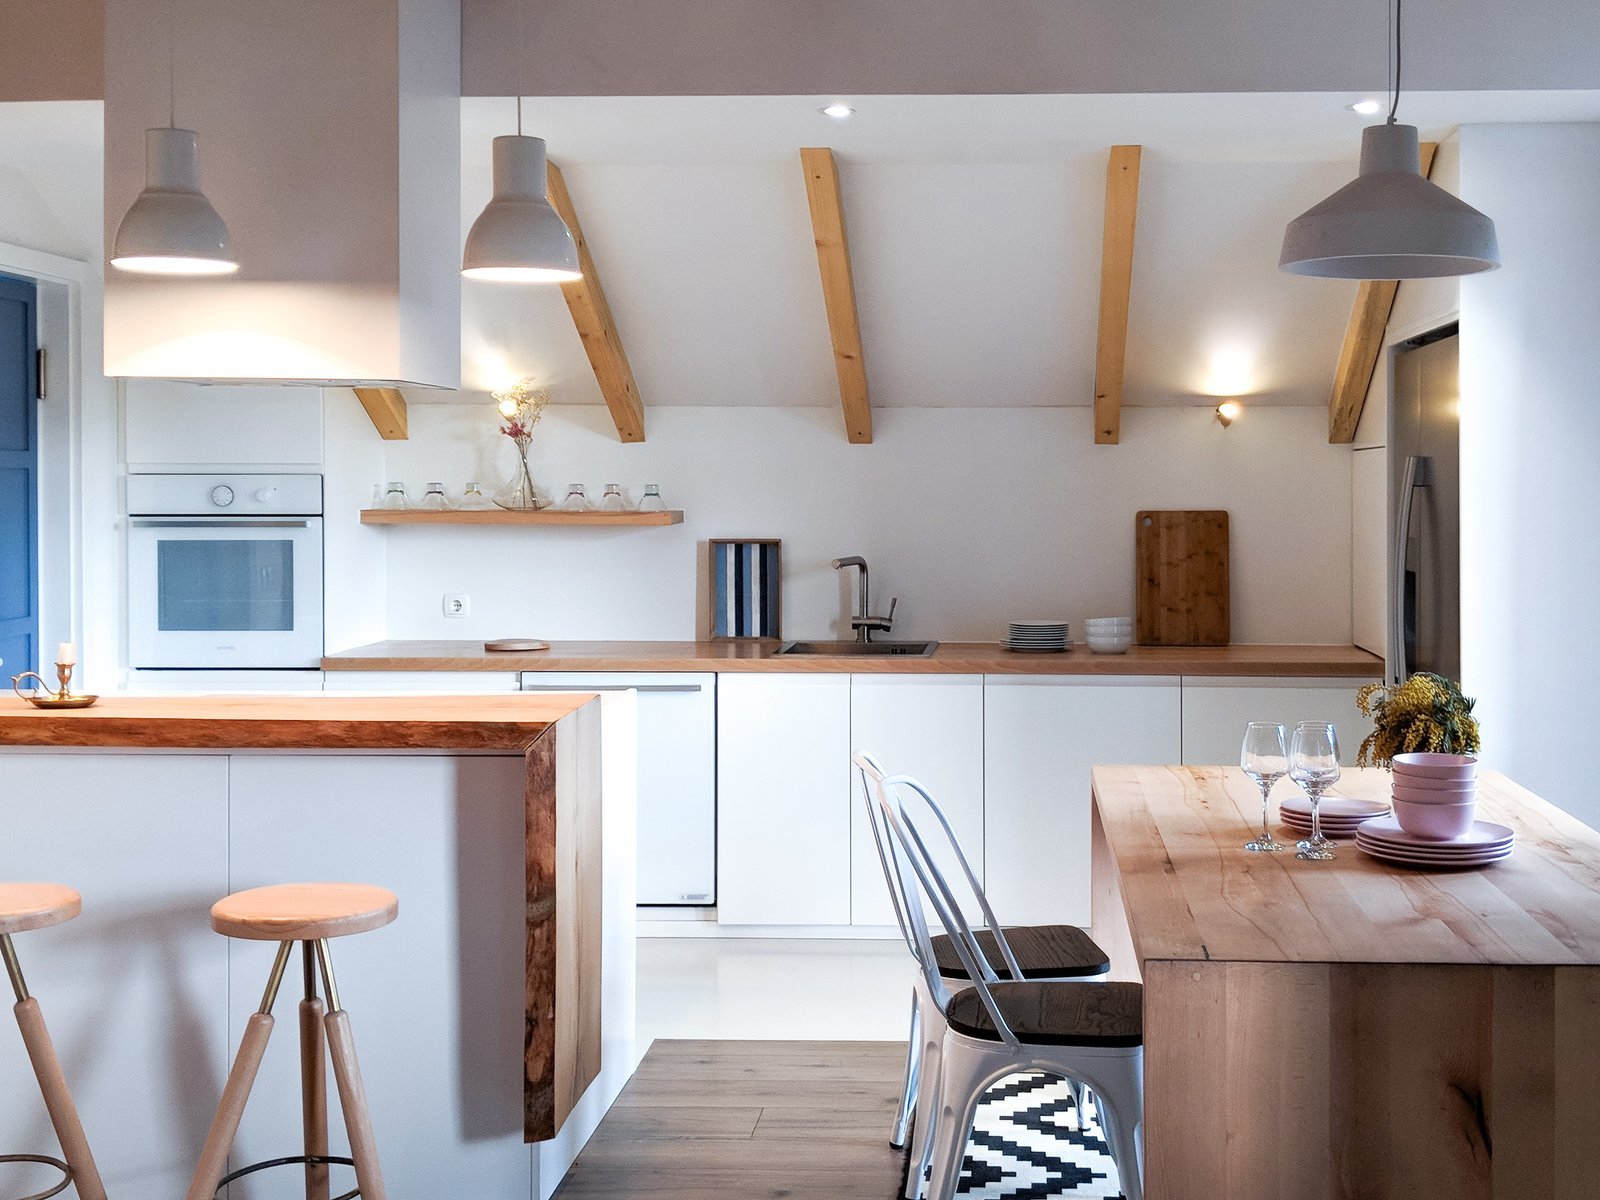 An Unloved Loft Is Brought Back to Life for a Newlywed Couple